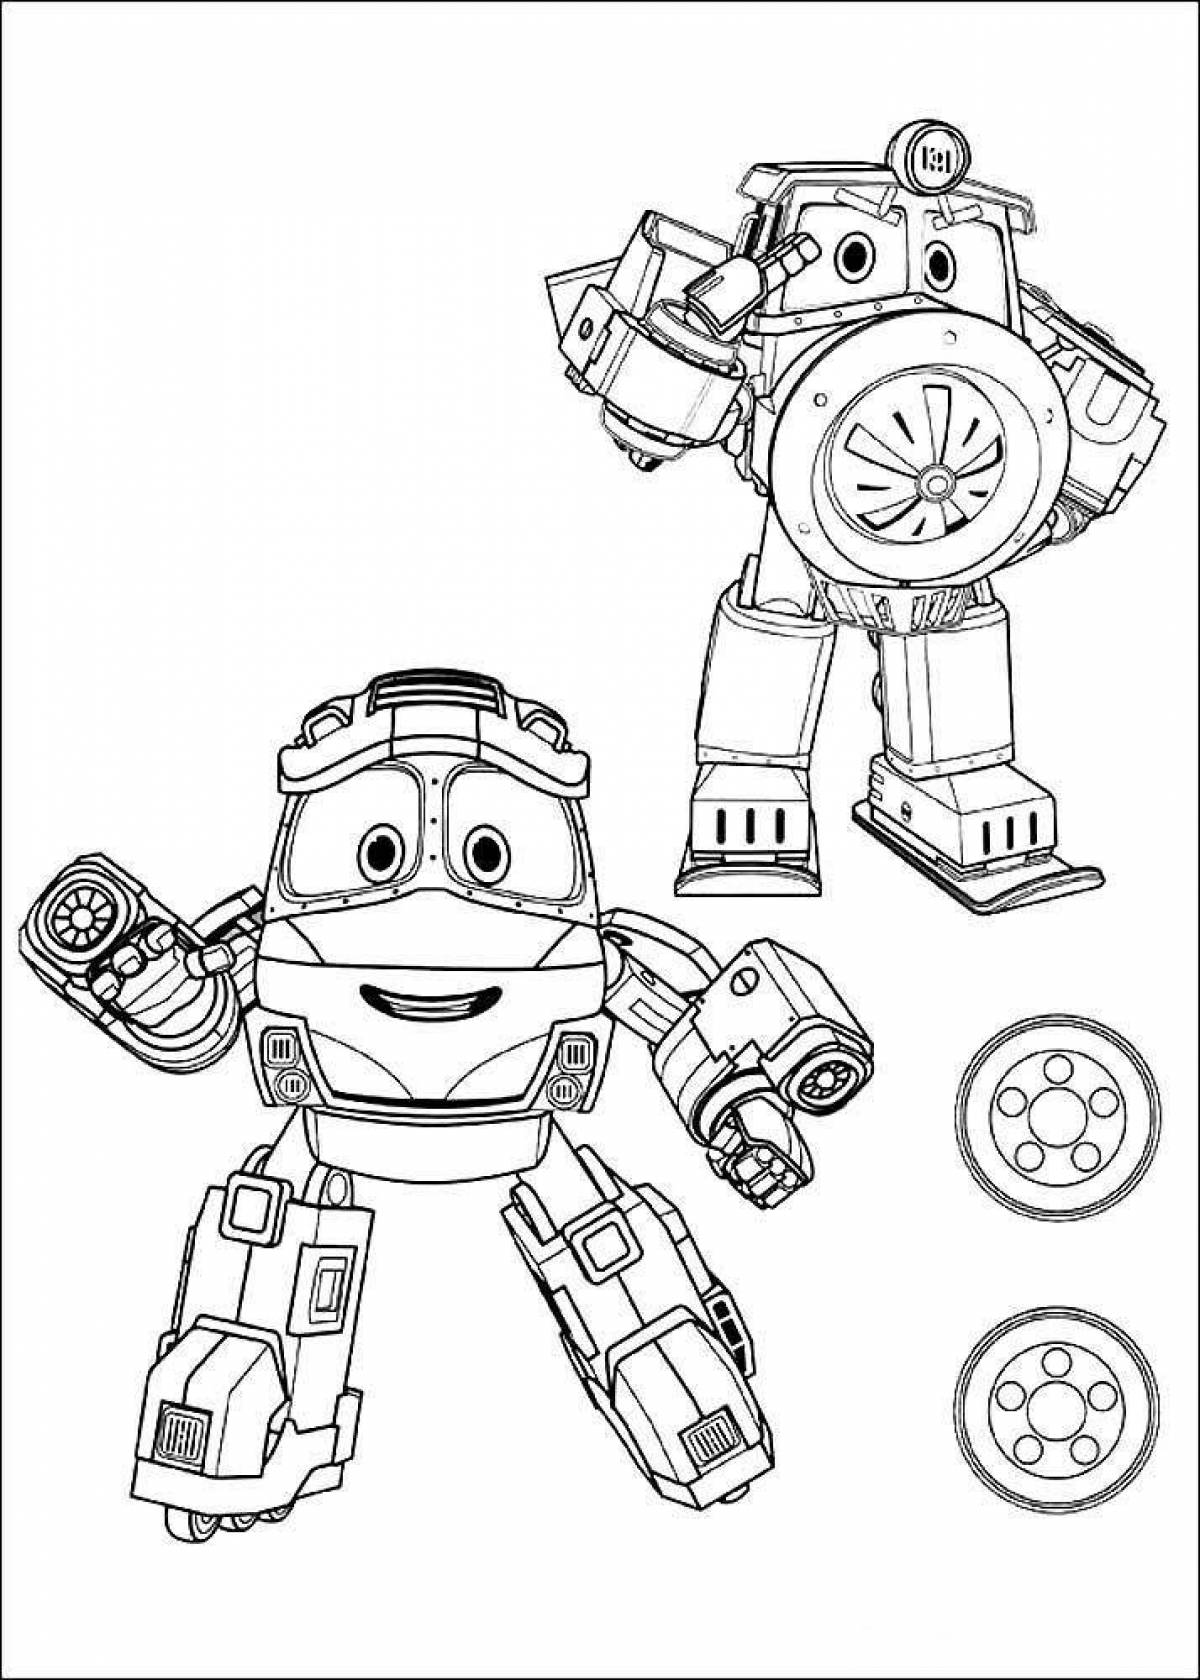 Colorful robot train coloring pages for kids